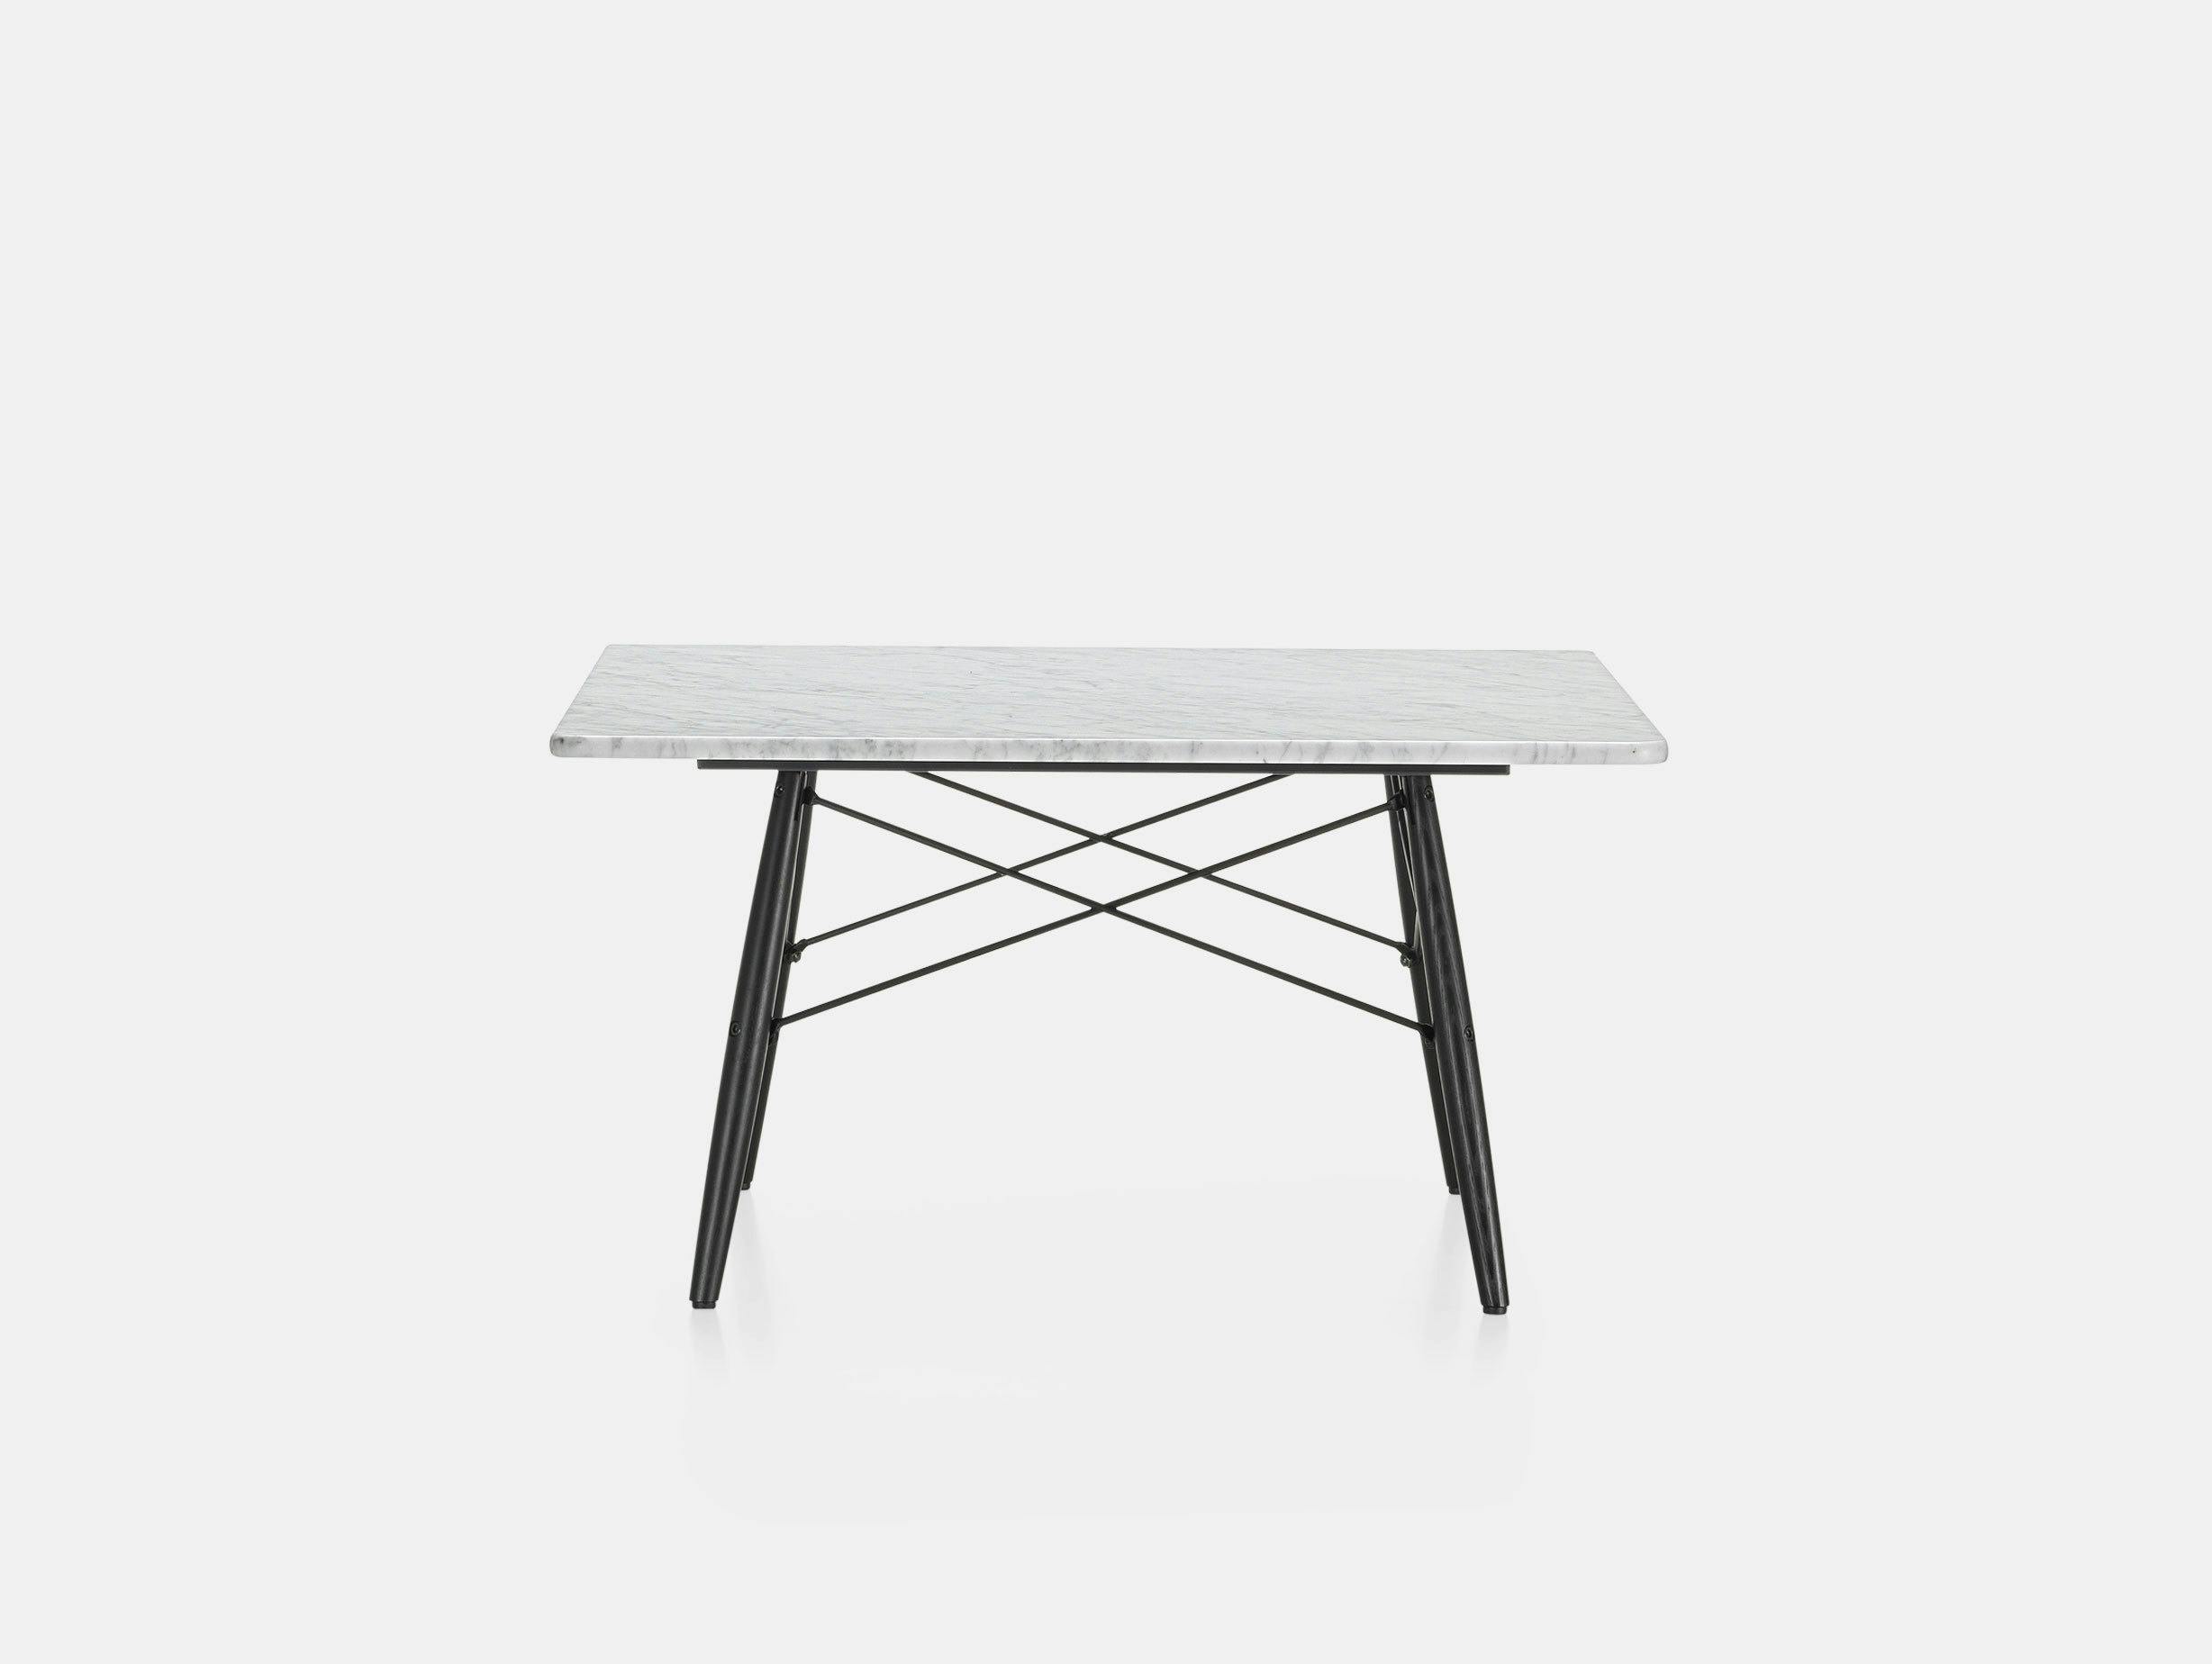 Vitra Eames Coffee Table Marble Charles And Ray Eames